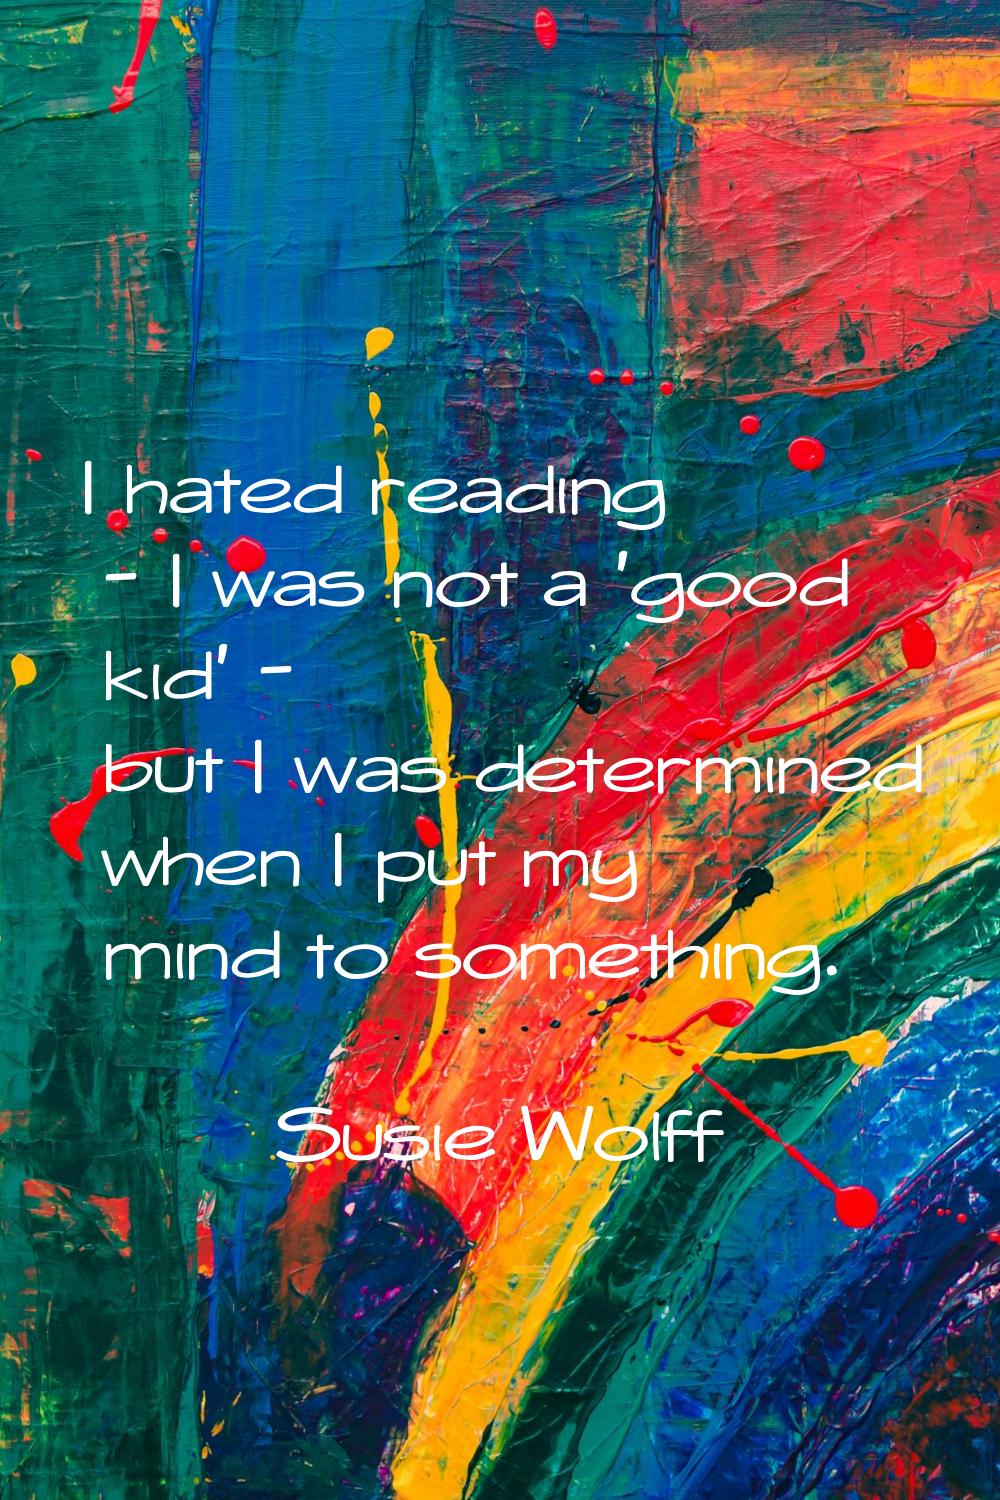 I hated reading - I was not a 'good kid' - but I was determined when I put my mind to something.